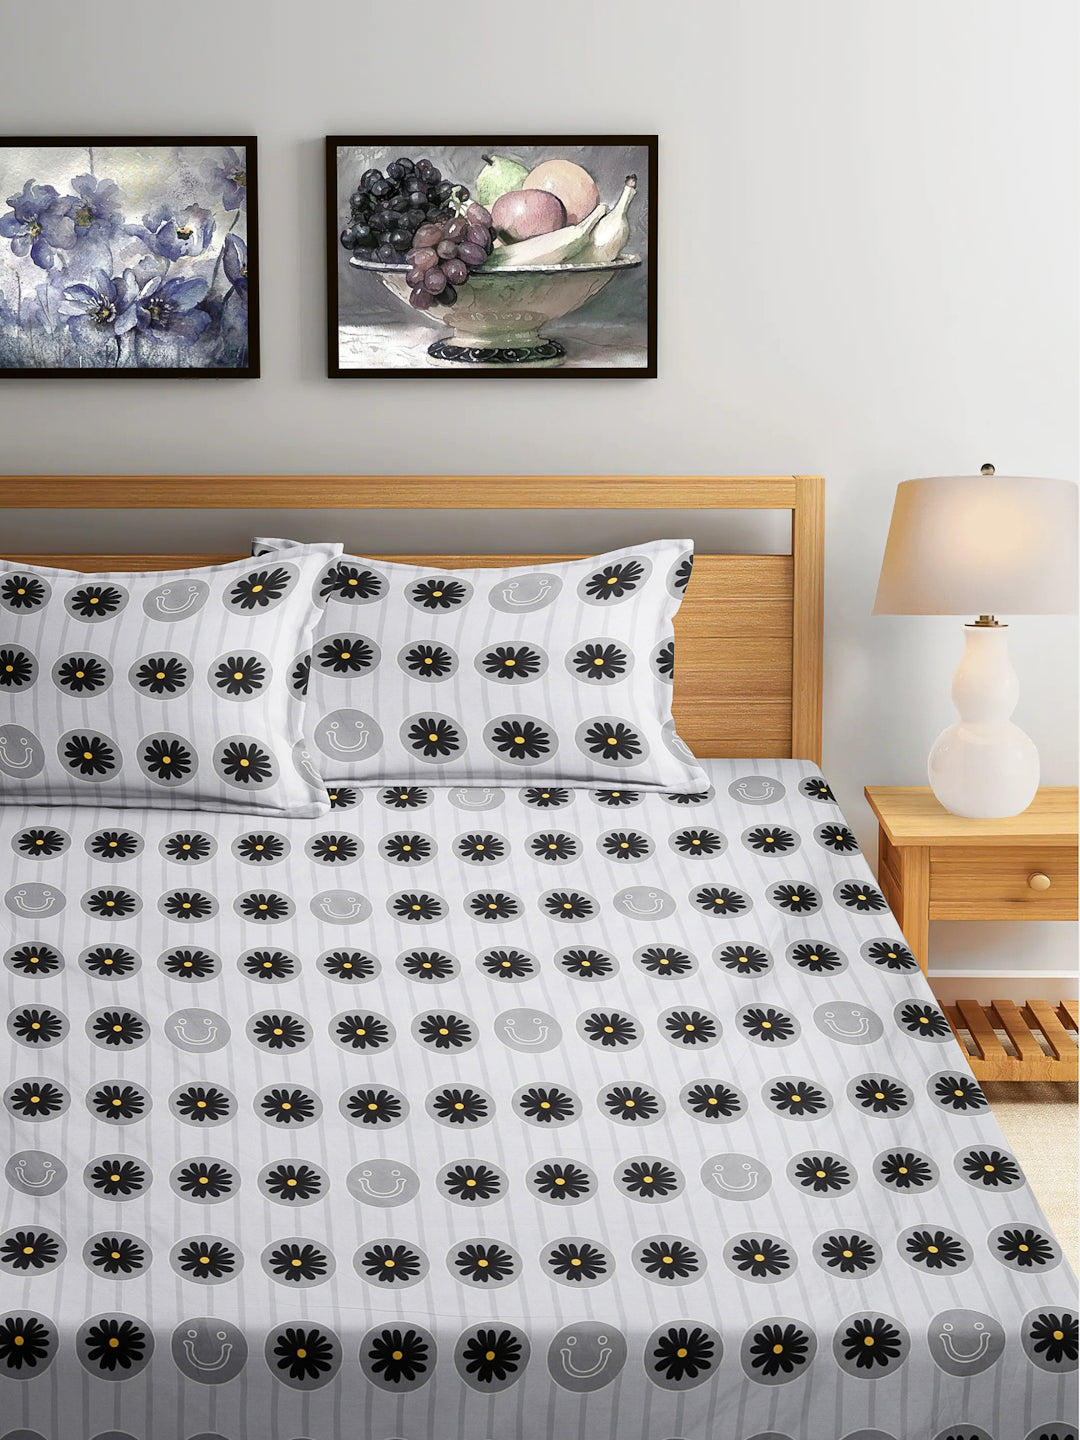 Arrabi Grey Floral TC Cotton Blend Super King Size Fitted Bedsheet with 2 Pillow Covers (270 X 260 Cm)